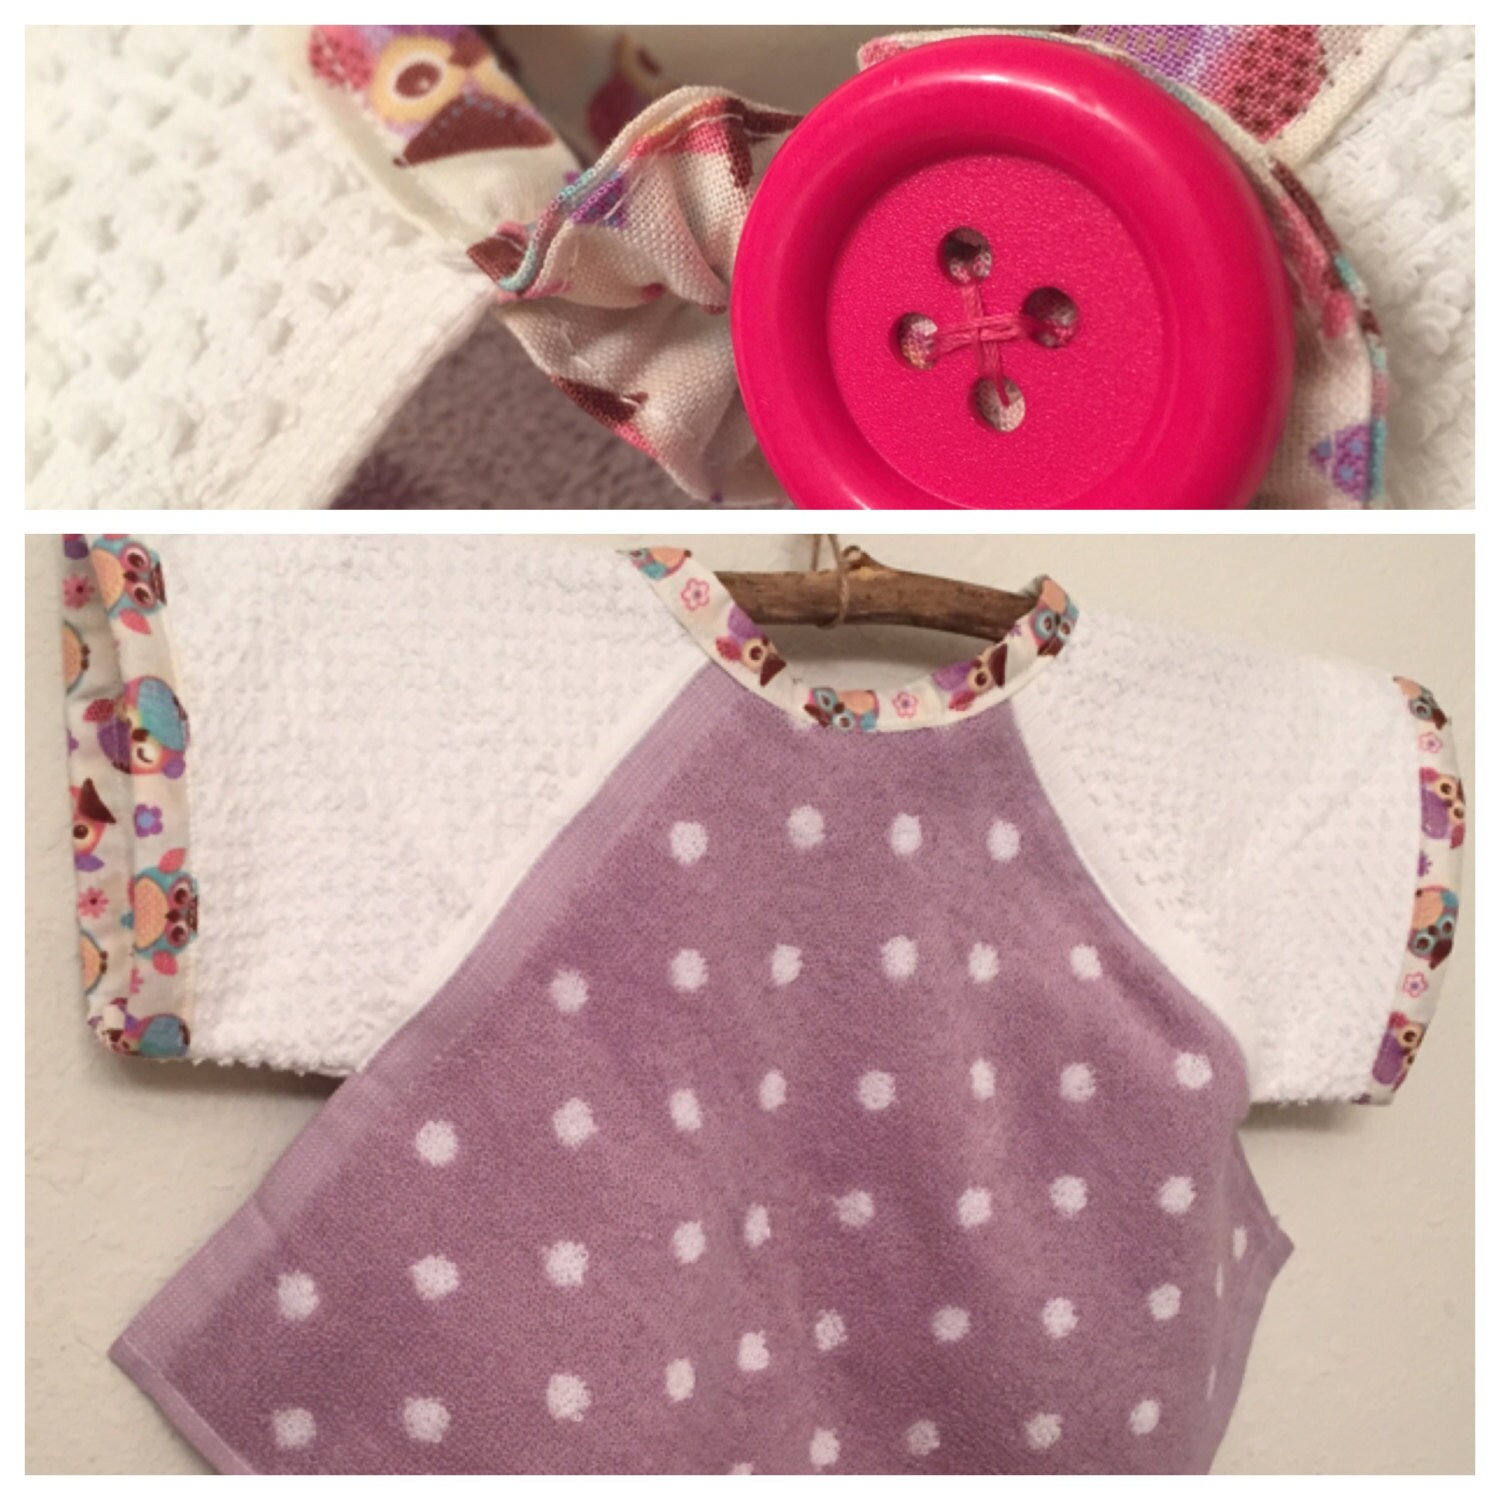 Baby Bib with Sleeves Toddler Bib with Sleeves by Bibs4Littles